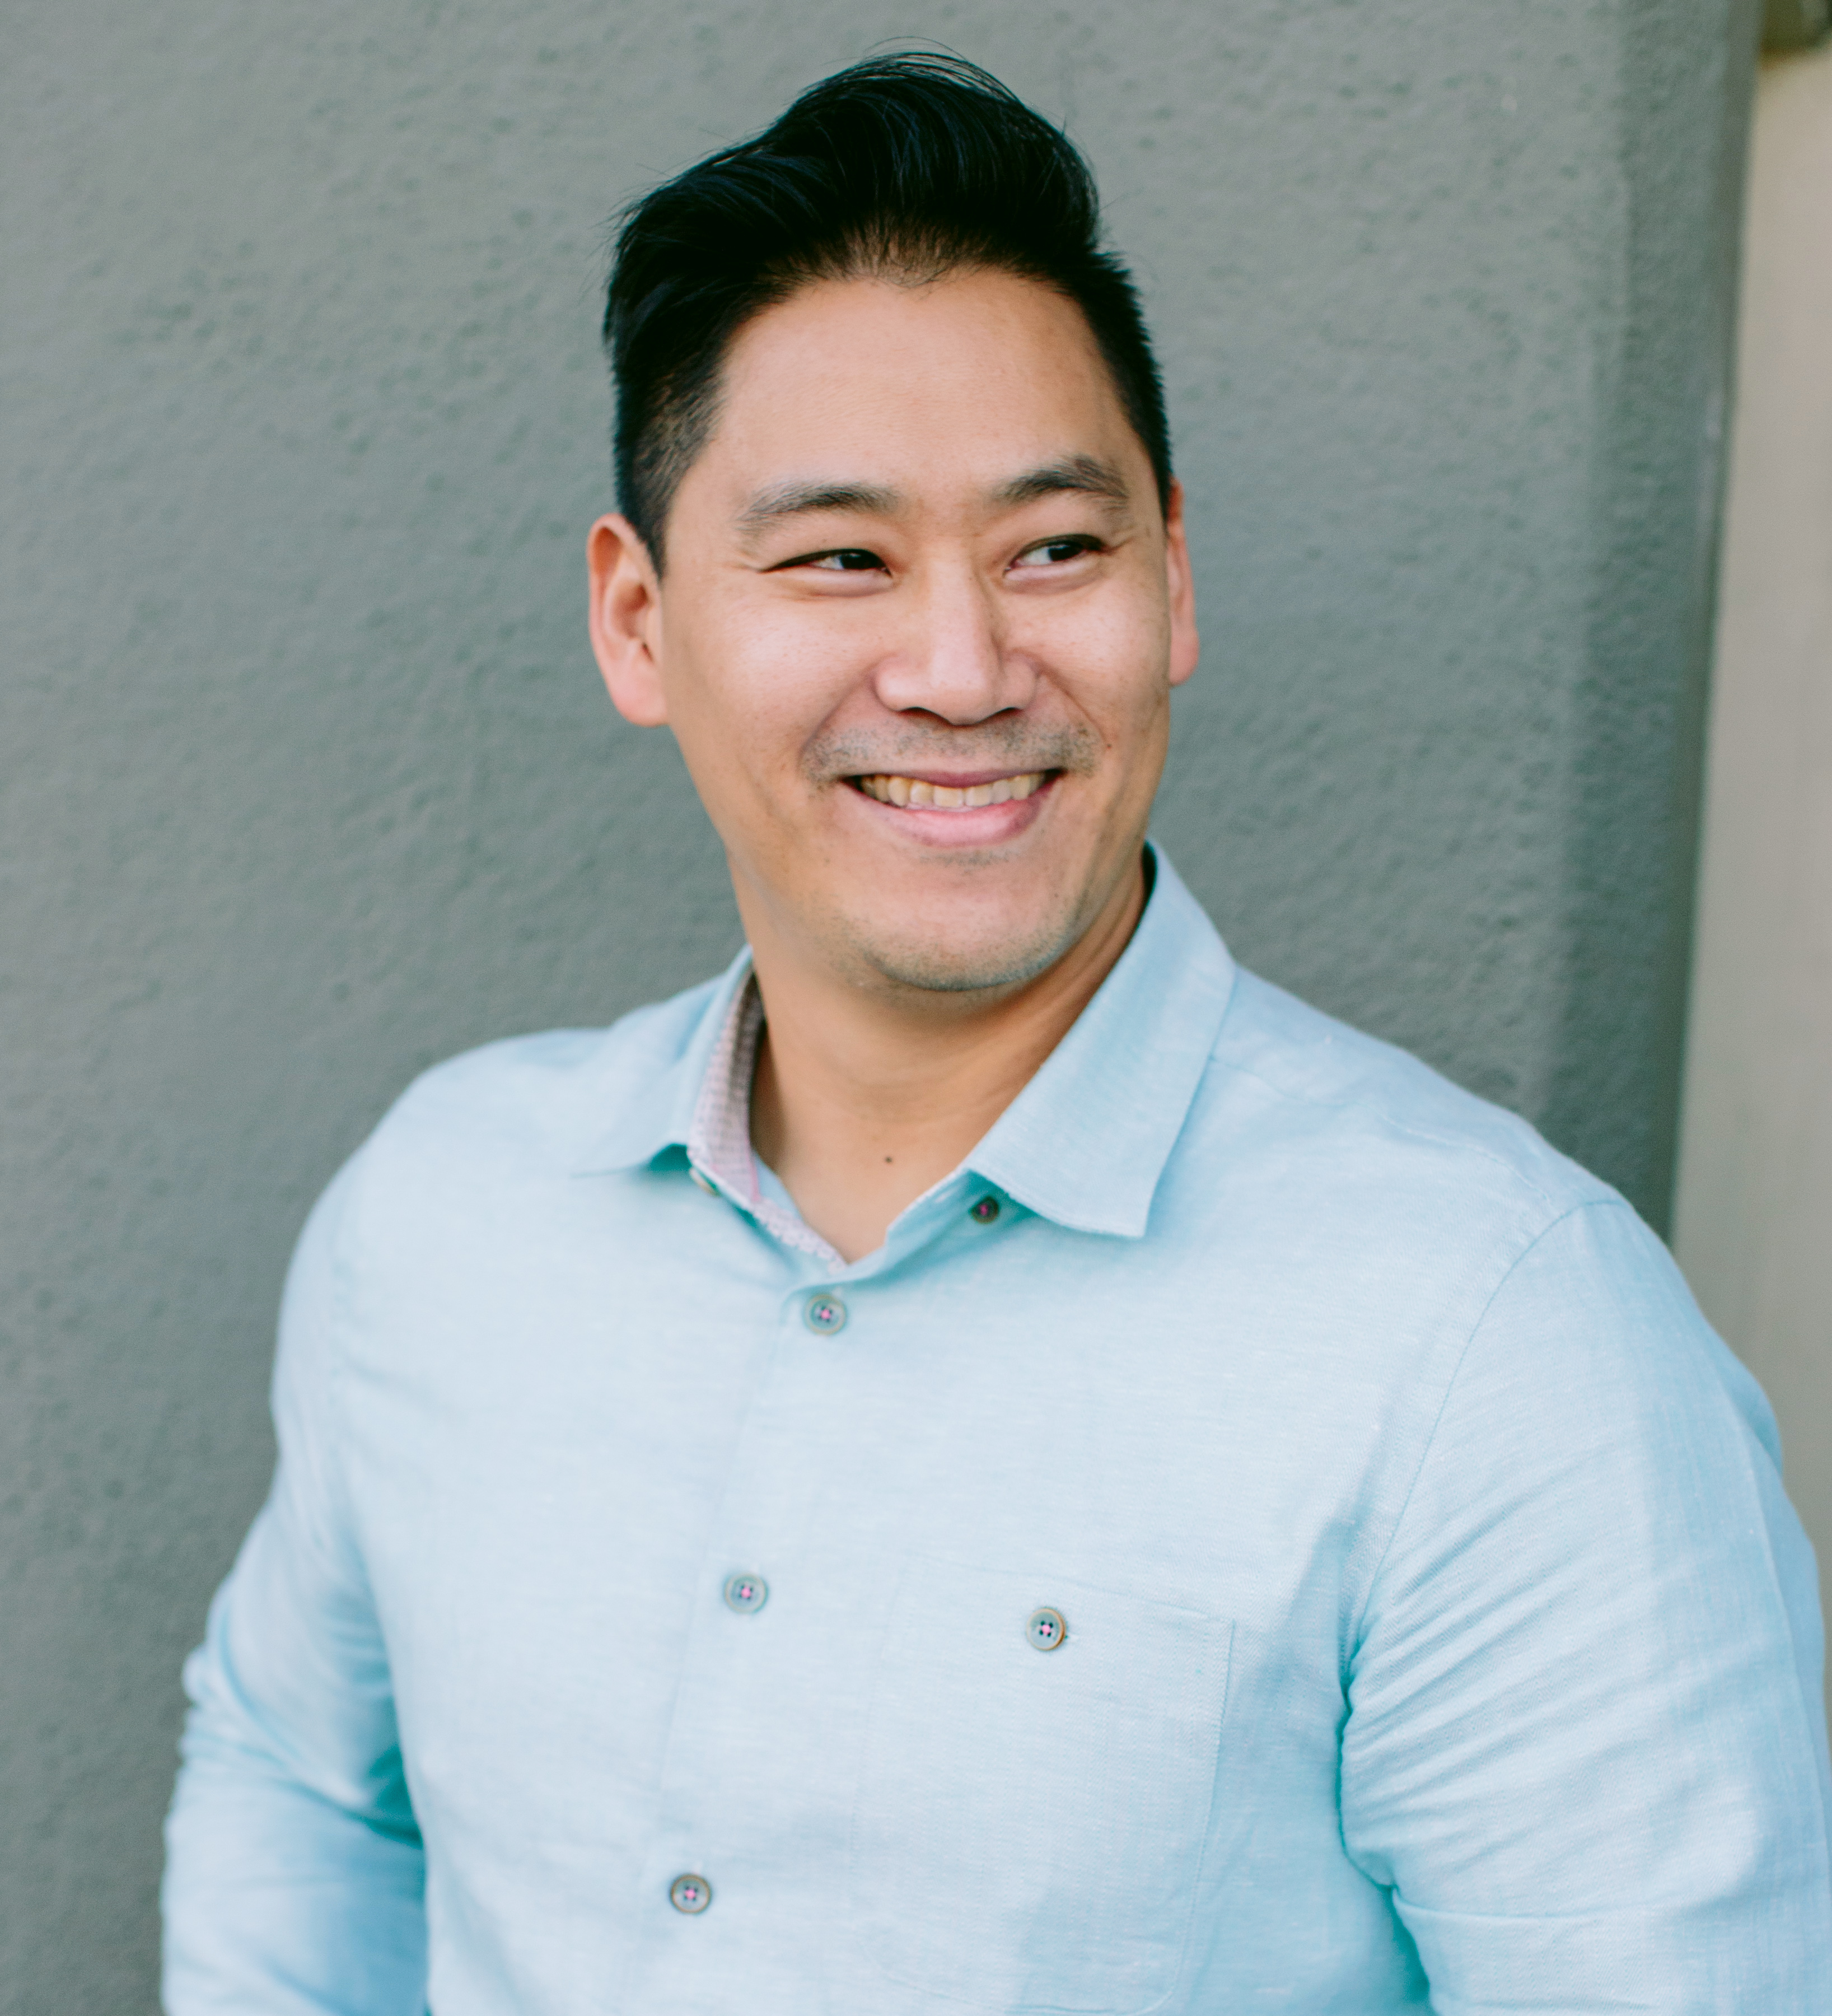 kevin ng, the co-founder of wildebeest, portrait photo